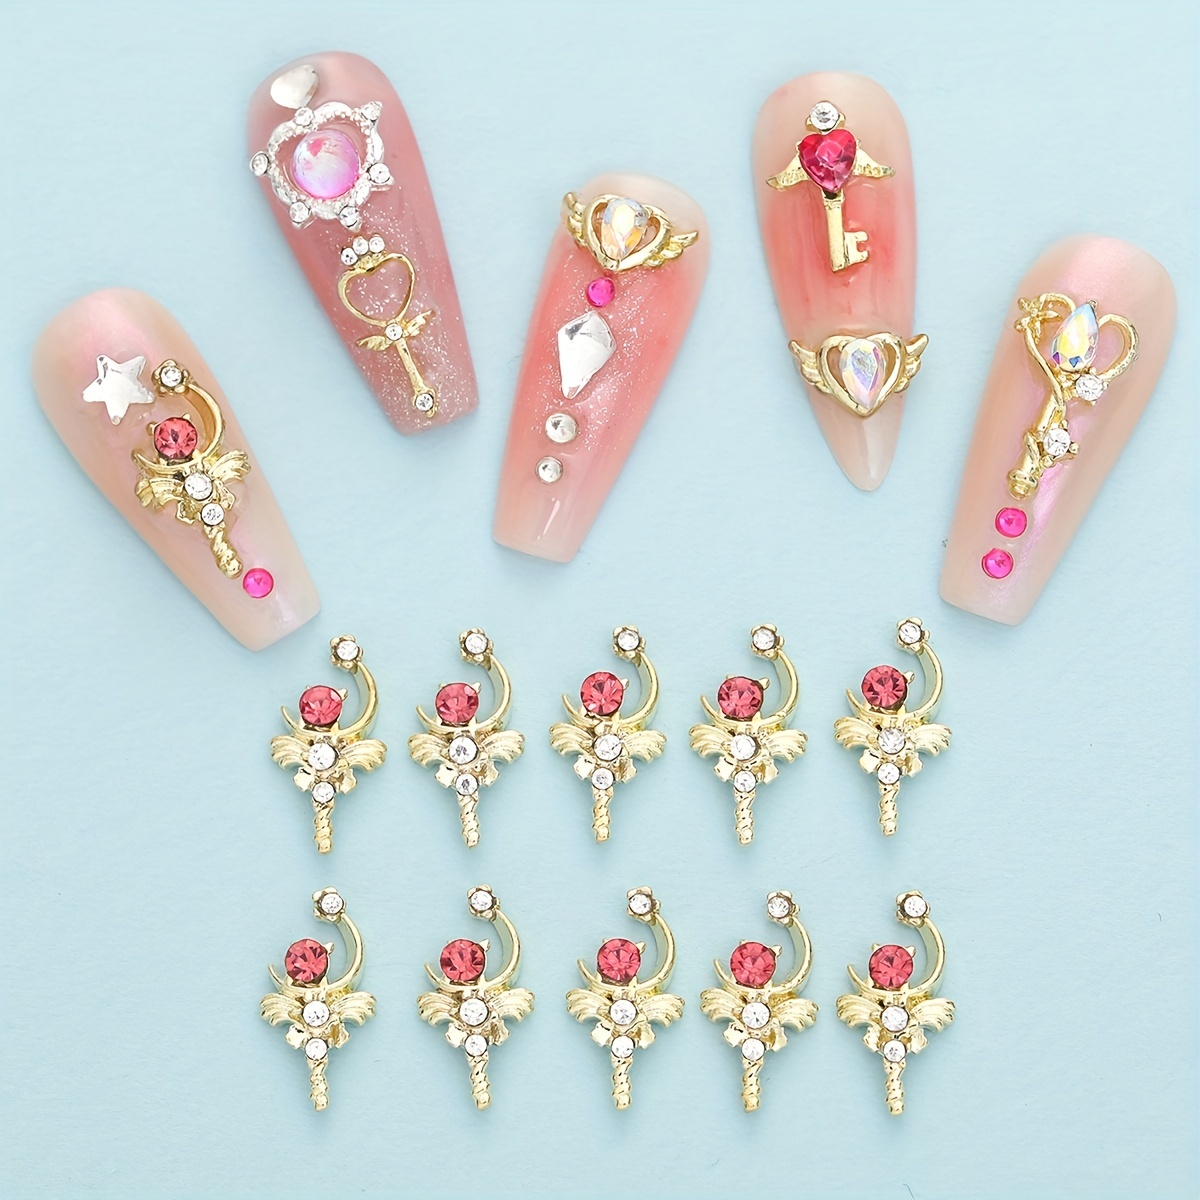 3D Dangle Nail Art Charms Alloy Moon Star Constellation Mixed